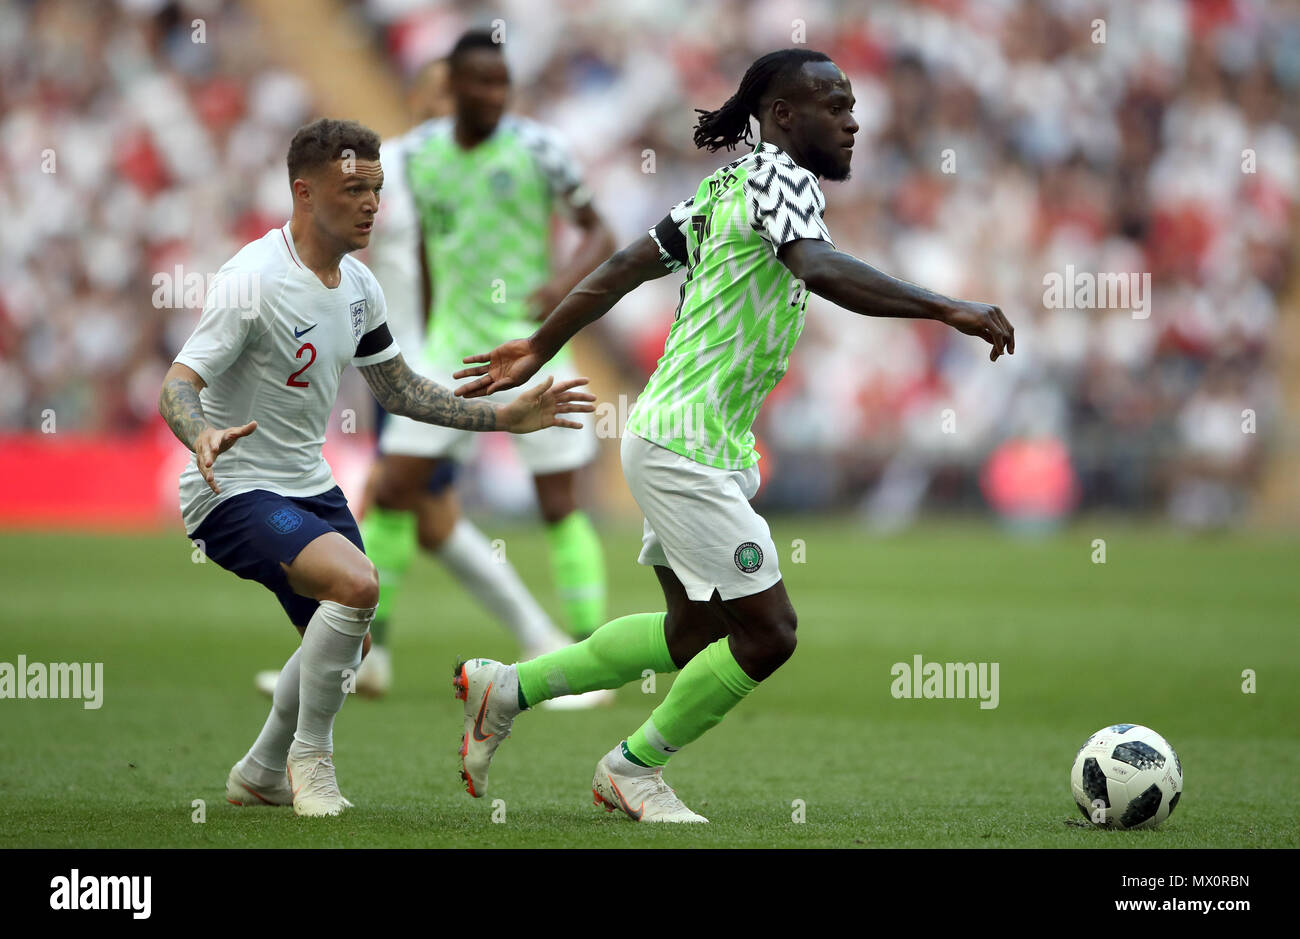 England's Kieran Trippier (left) and Nigeria's Victor Moses battle for the ball during the International Friendly match at Wembley Stadium, London. Stock Photo